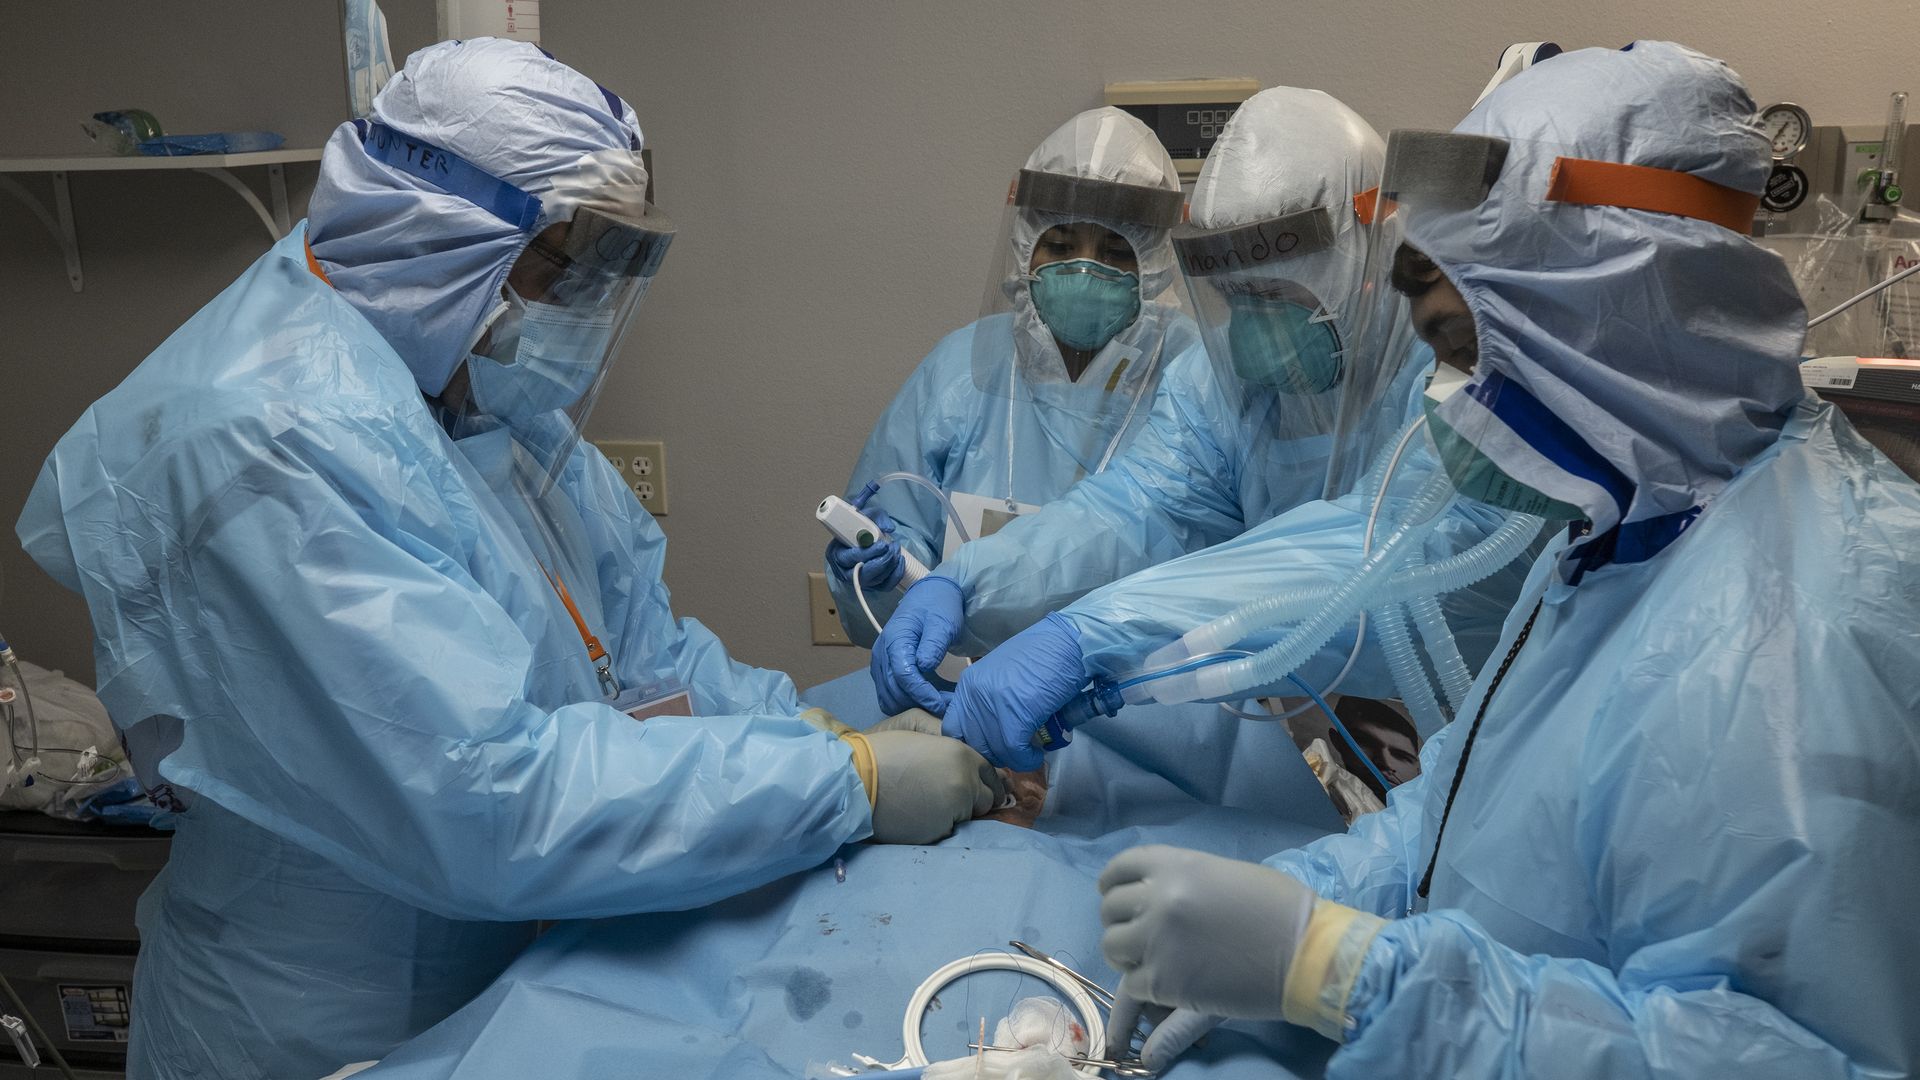 Caption: Hospital staff work in the COVID-19 intensive care unit in Houston.